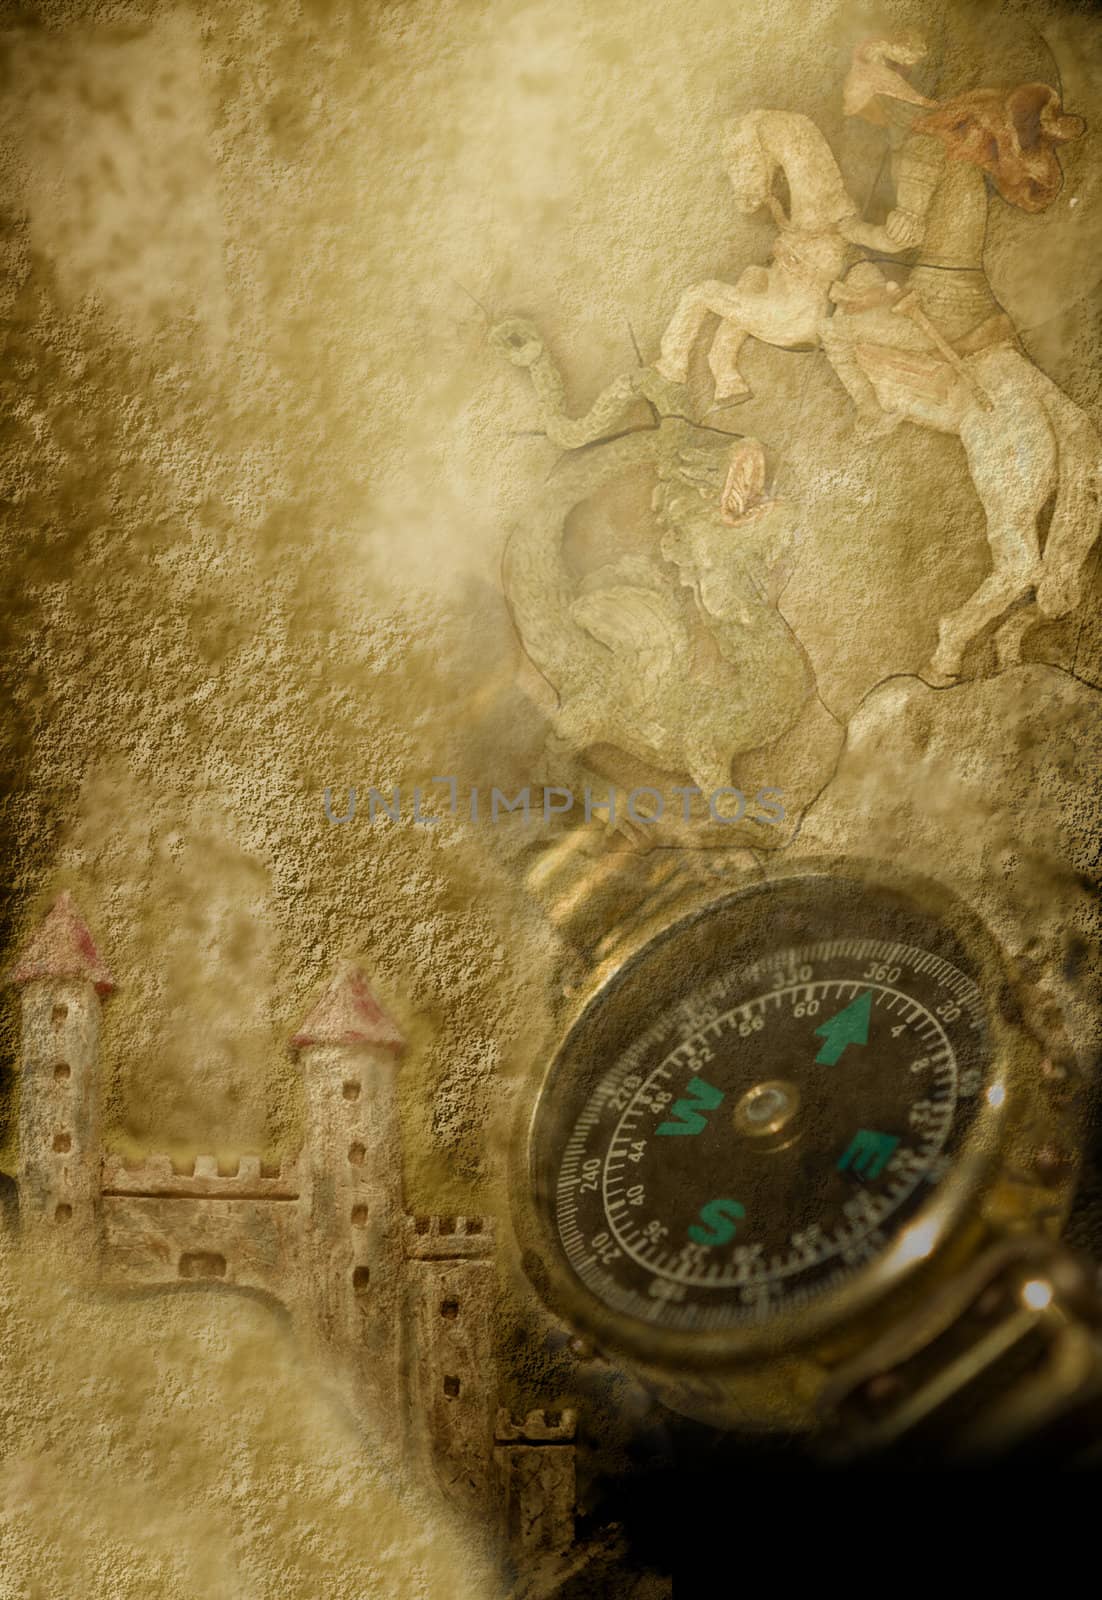 sepia parchment with compass, castles and medieval knight 